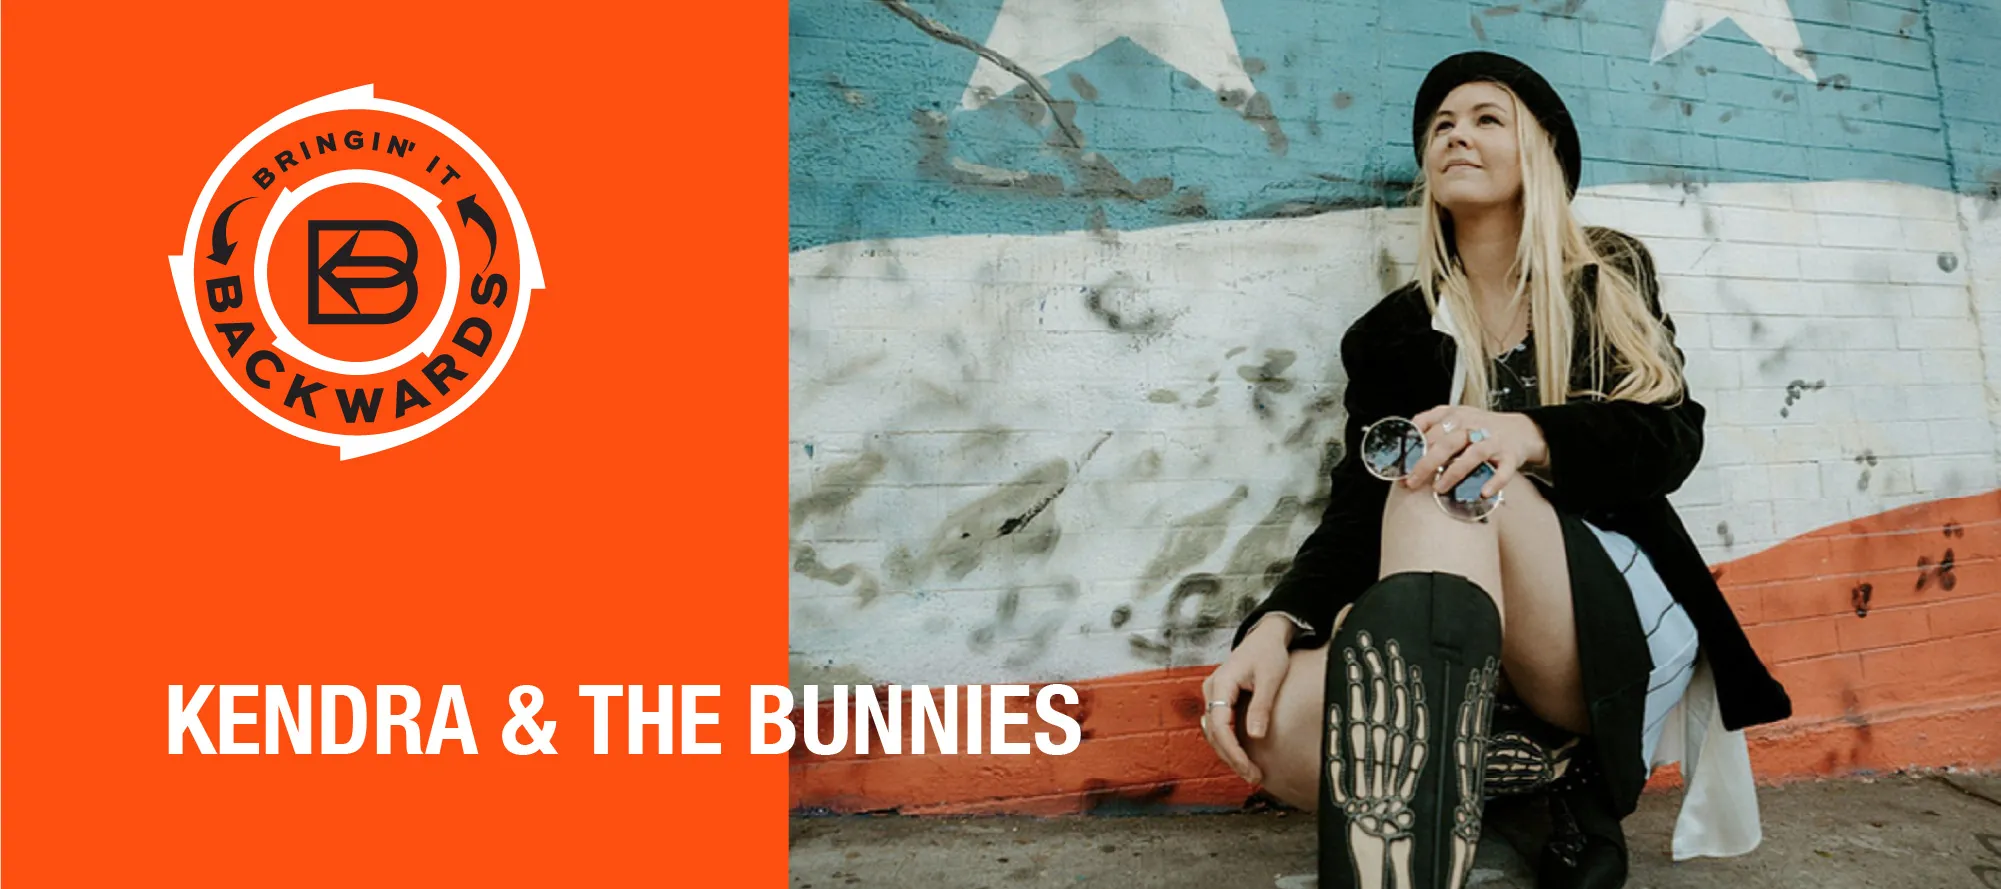 Bringin’ it Backwards: Interview with Kendra & The Bunnies